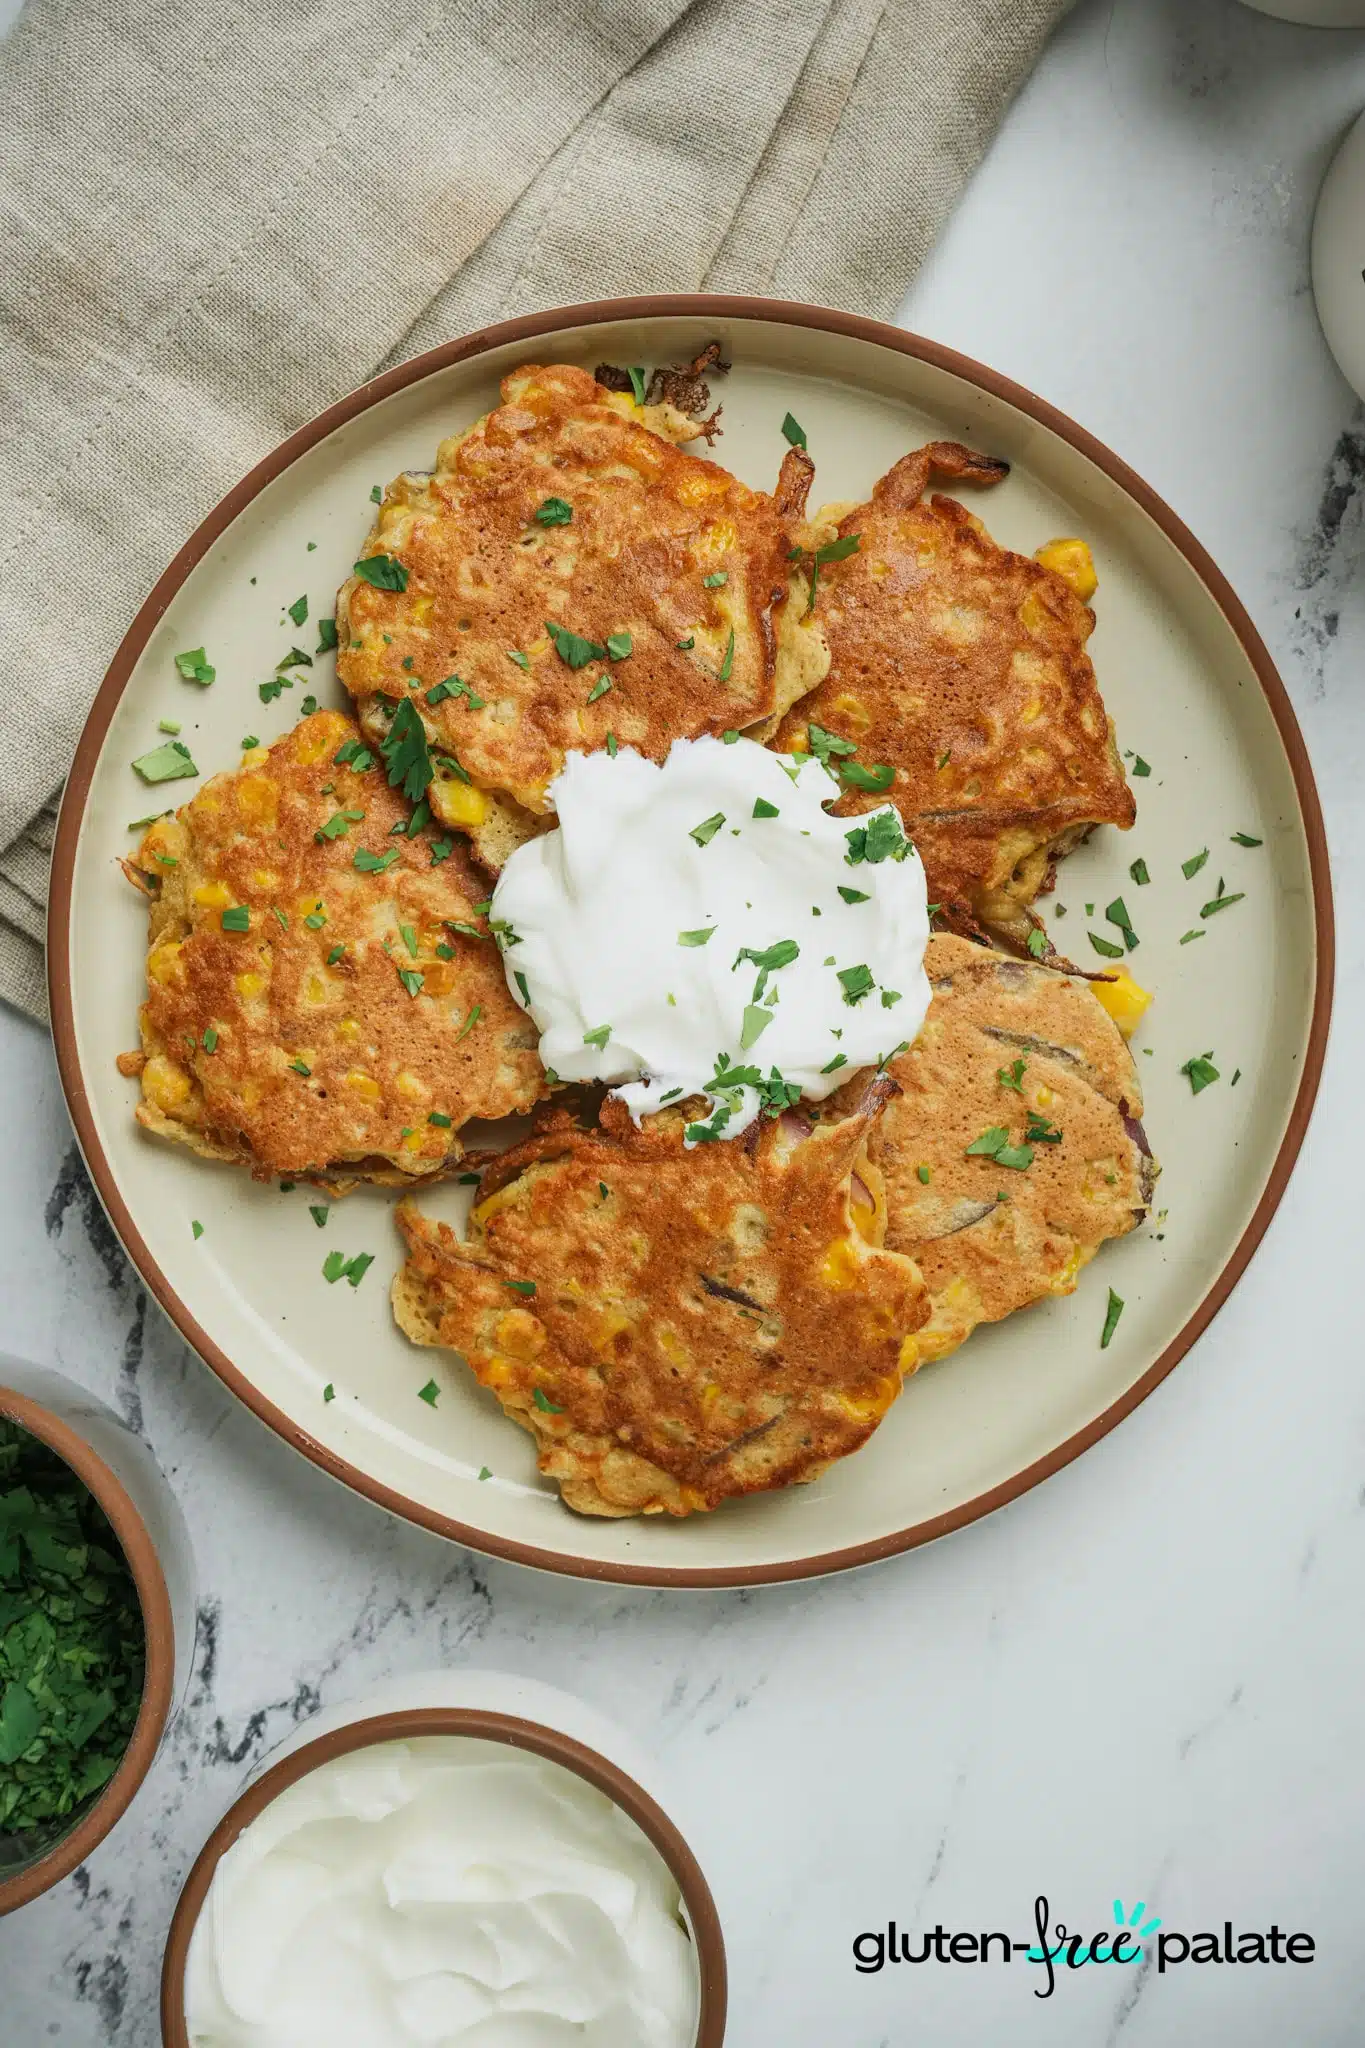 Gluten-free corn fritters on a plate with dipping sauce.